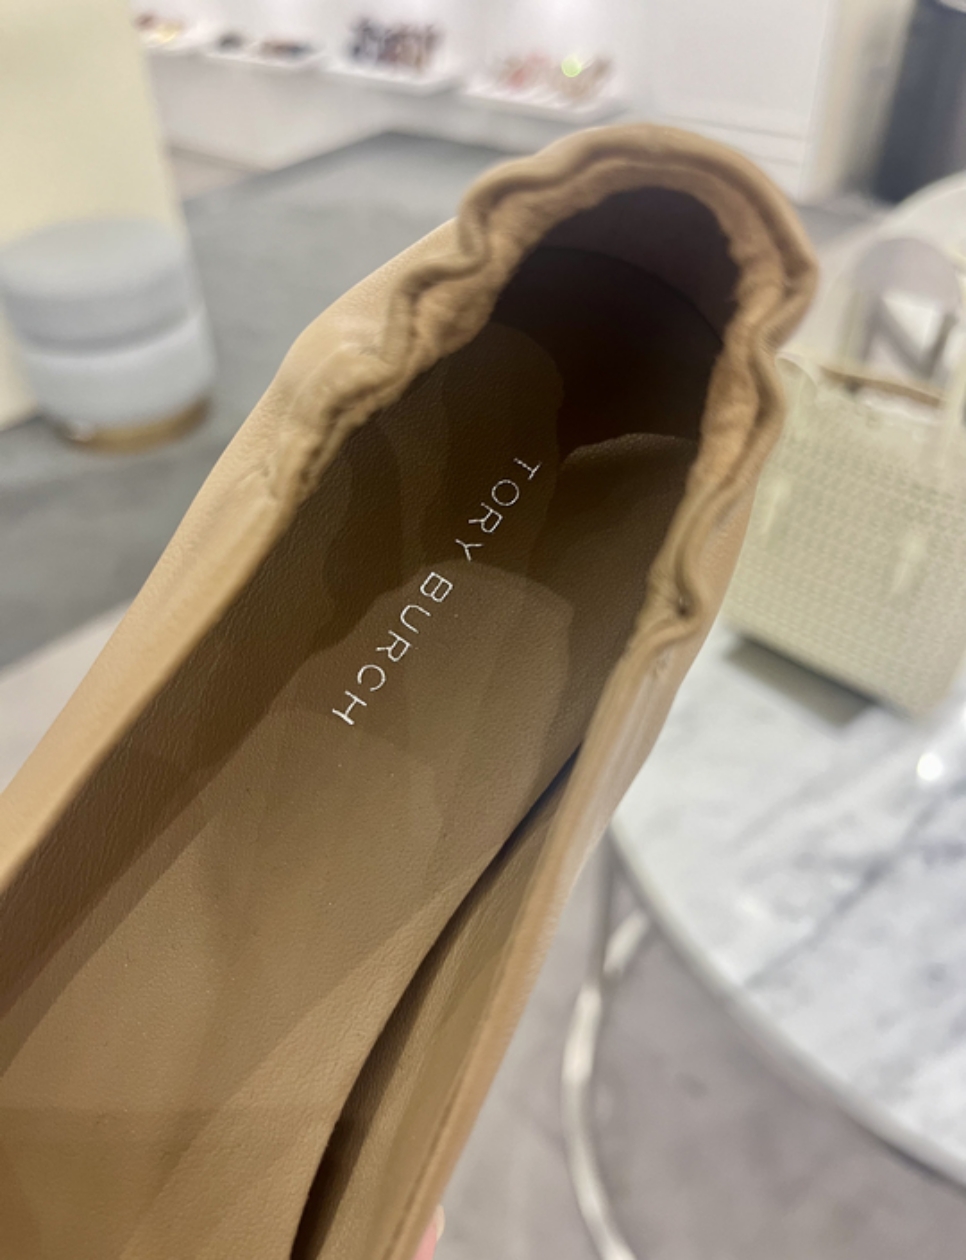 Interior Tory Burch flat shoes